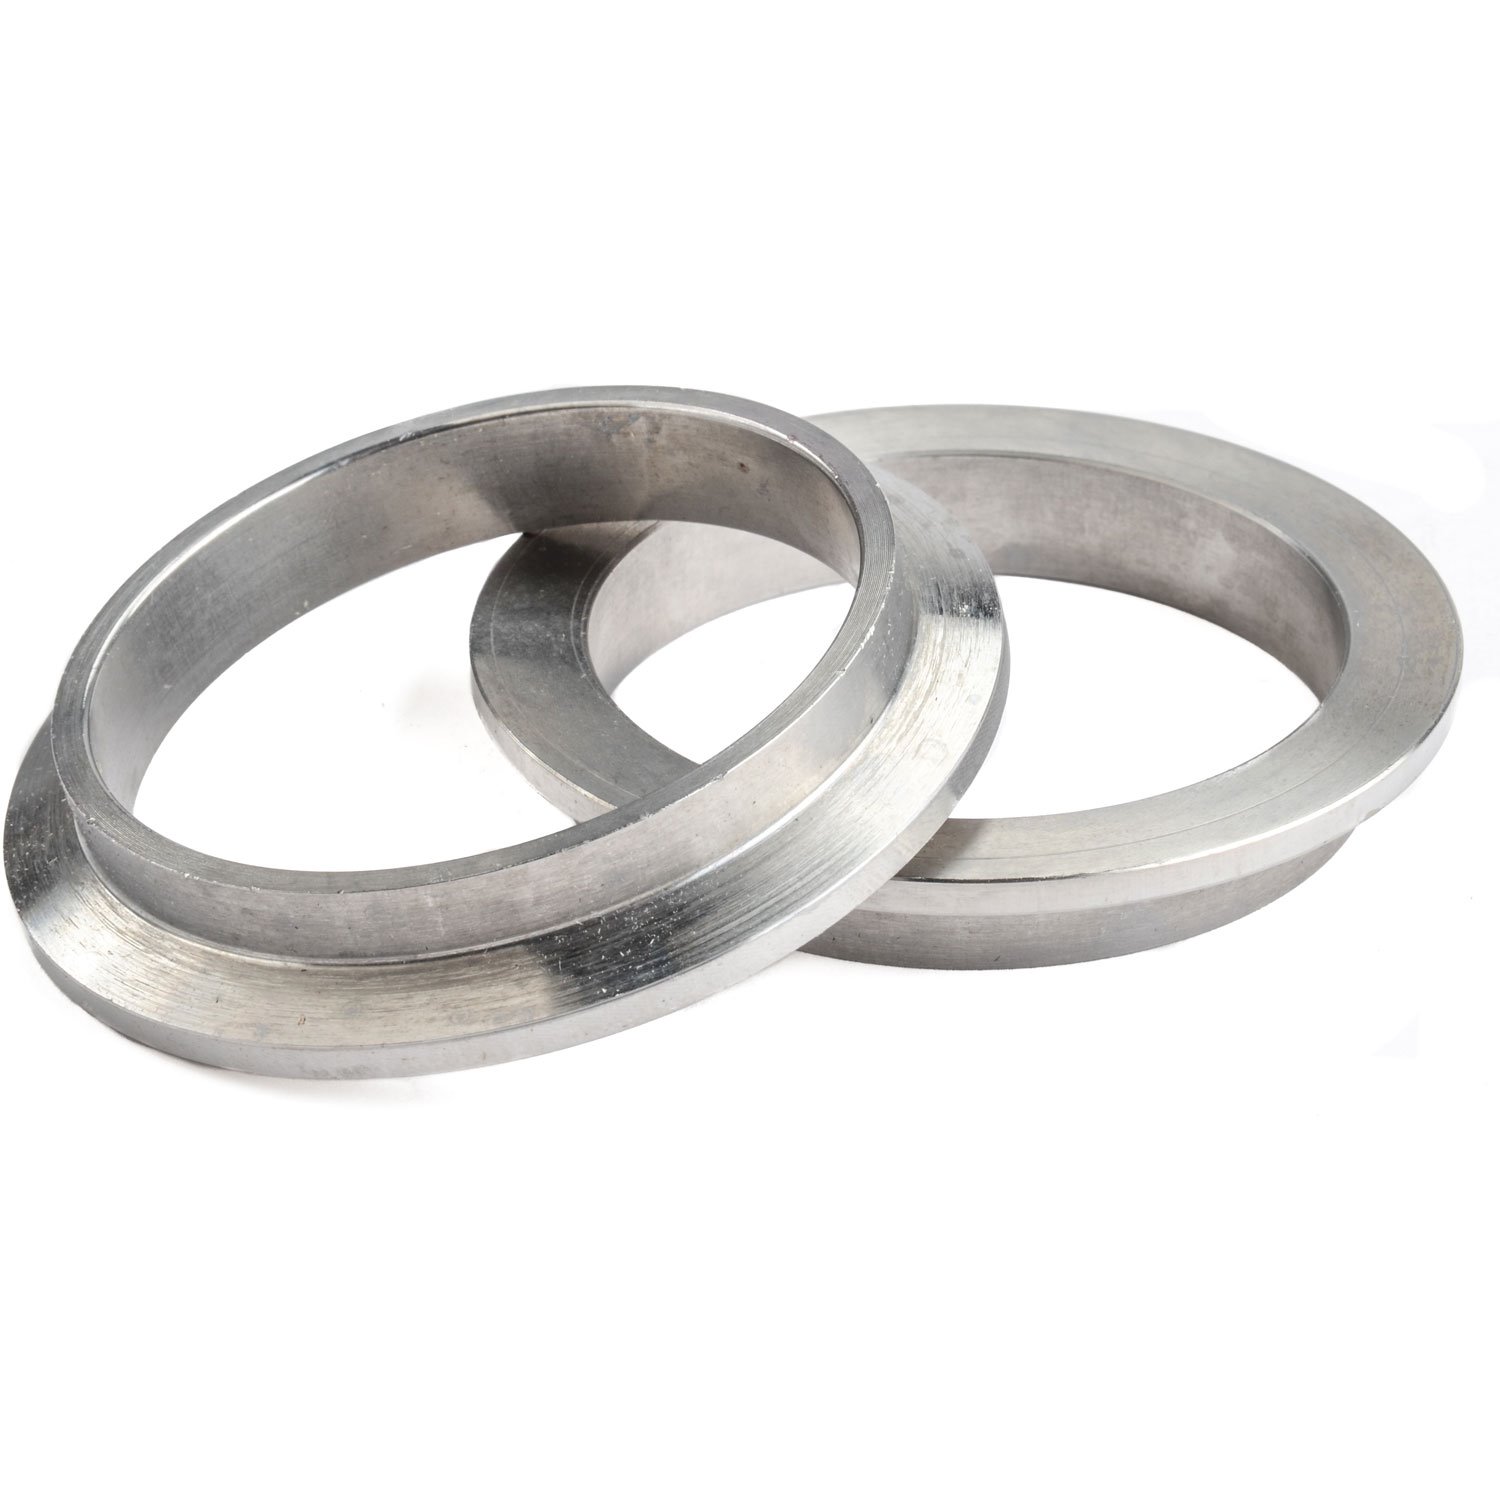 Stainless Steel V-Band Flanges 2.500 in.